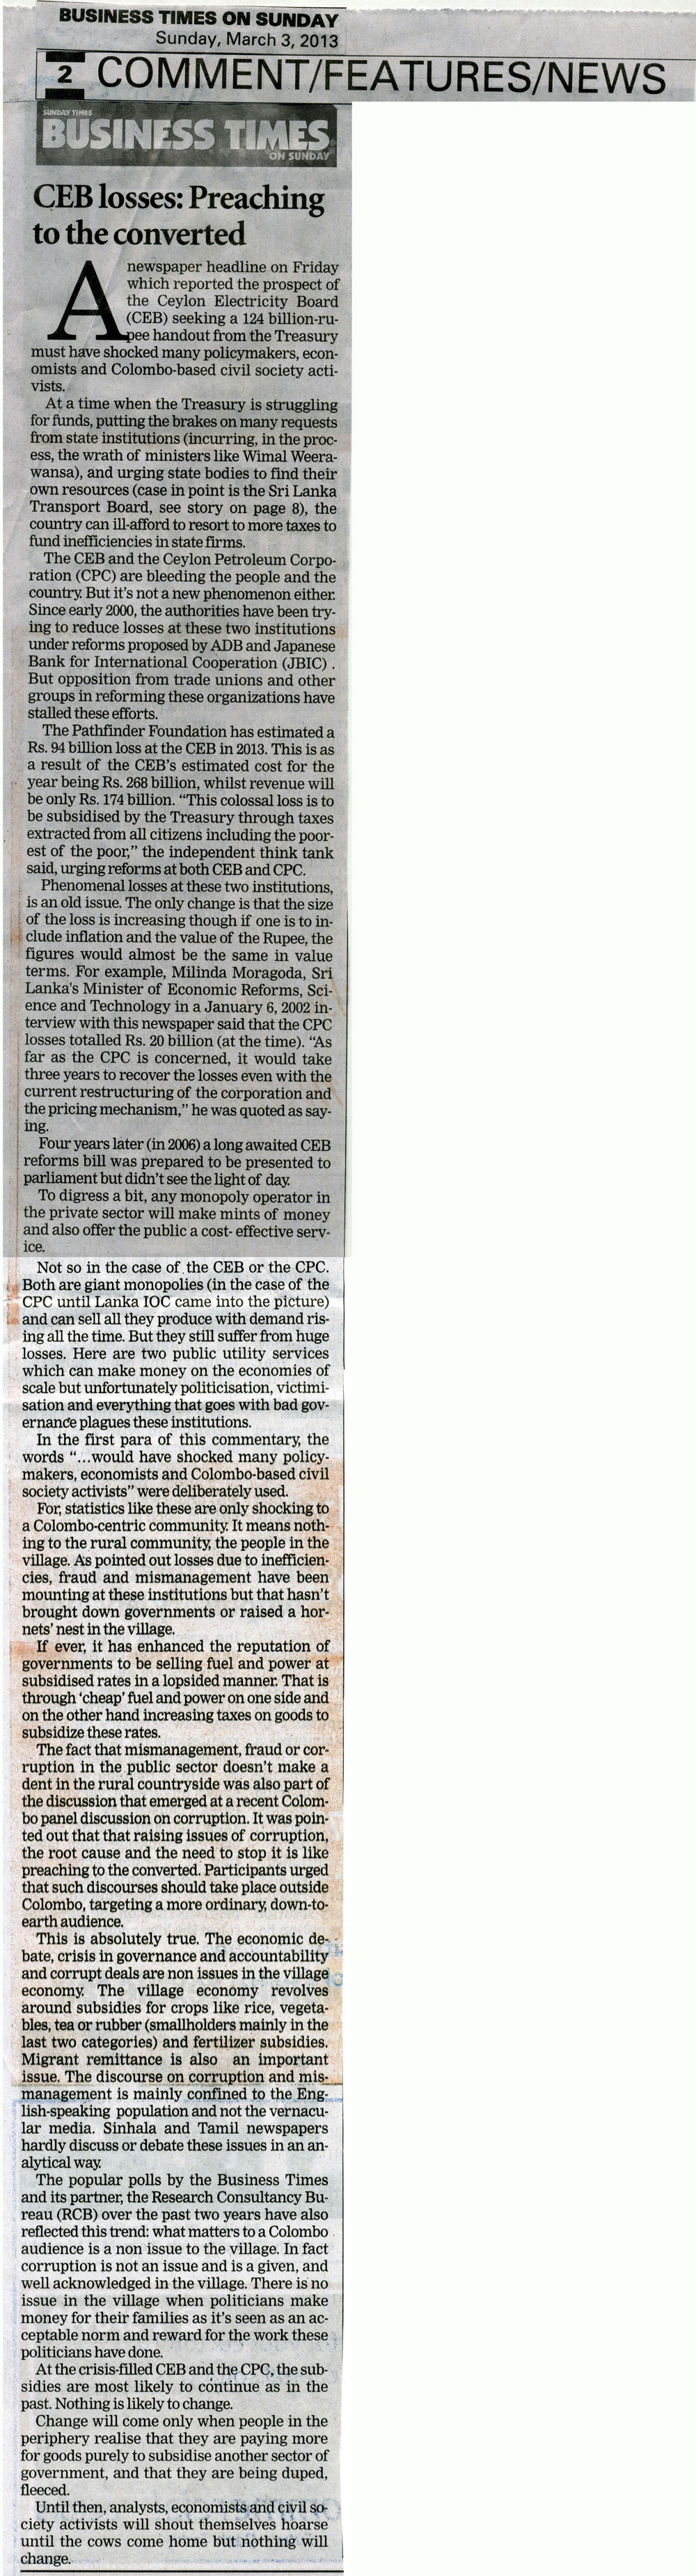 Business Times 030313